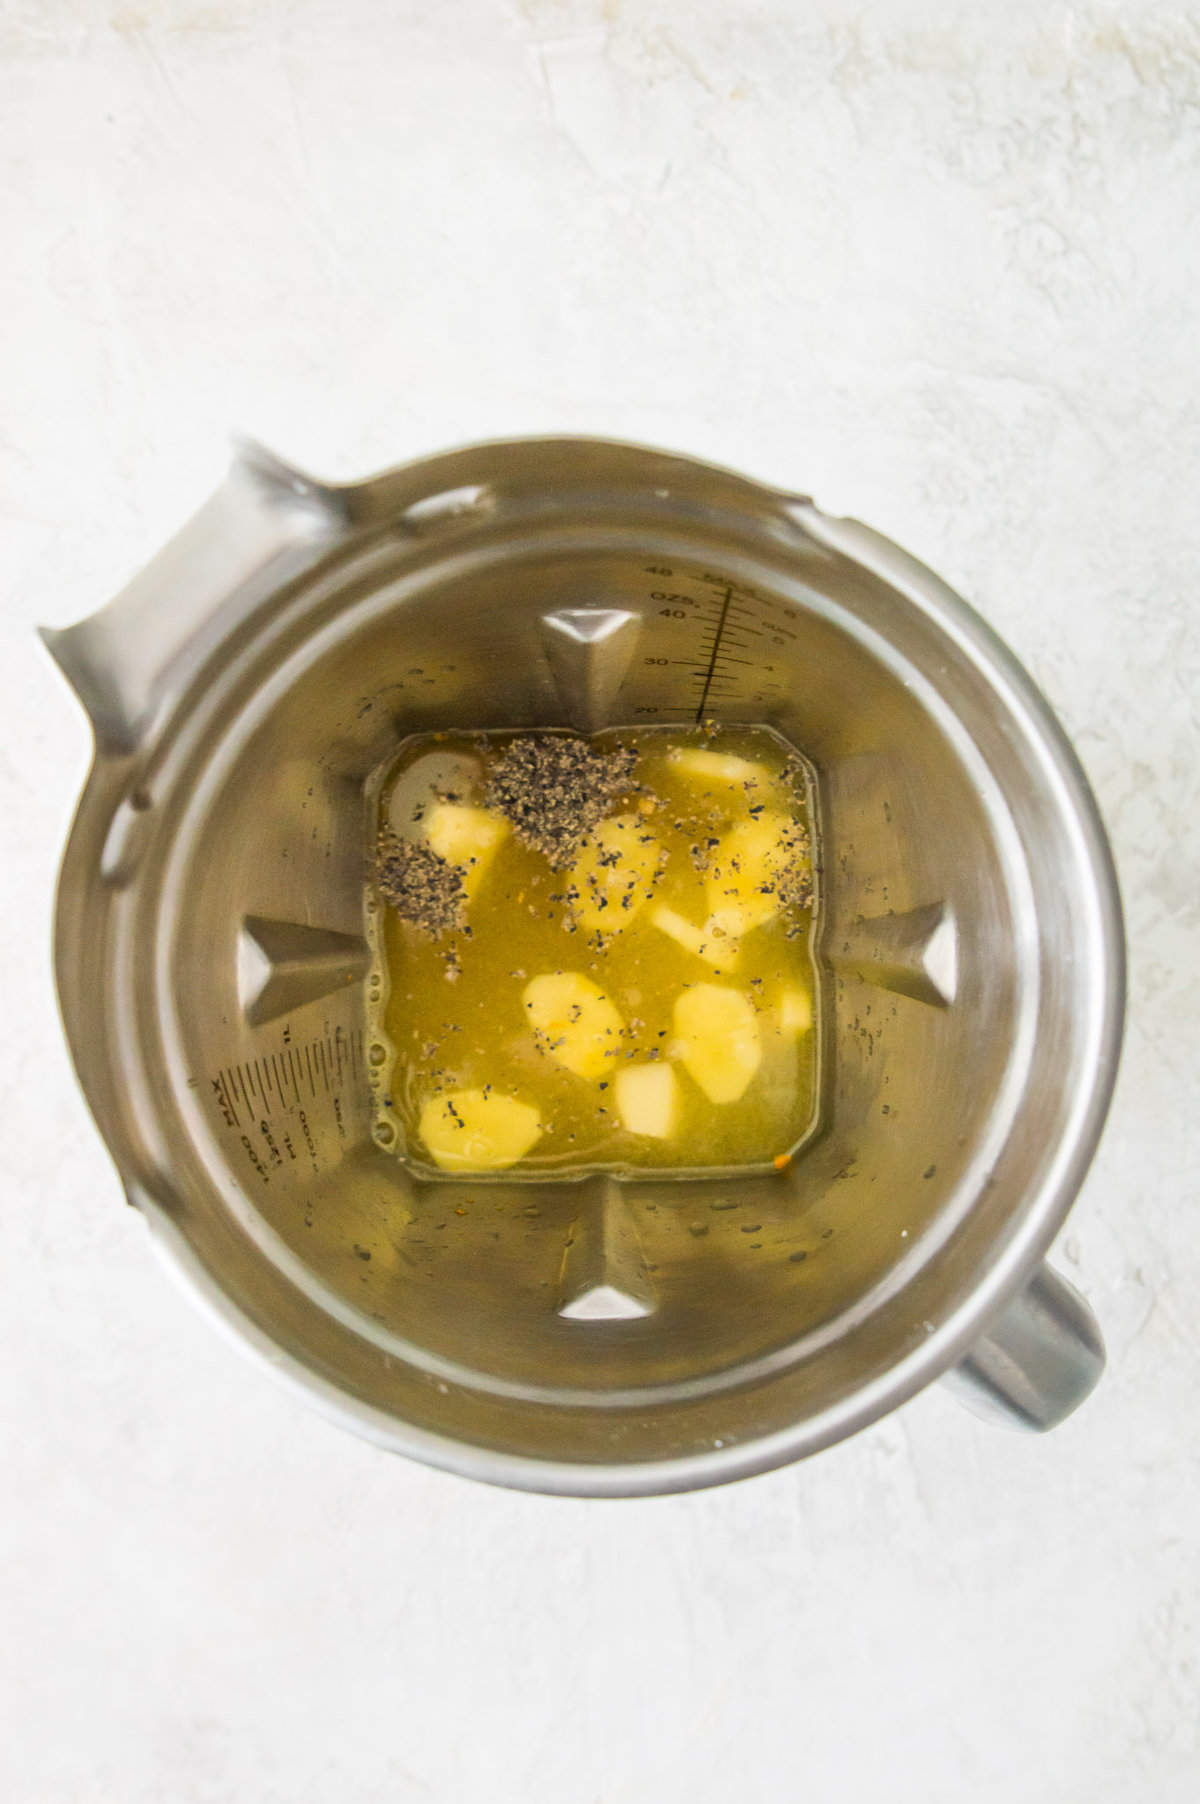 A blender filled with water, pieces of ginger, turmeric and black pepper.